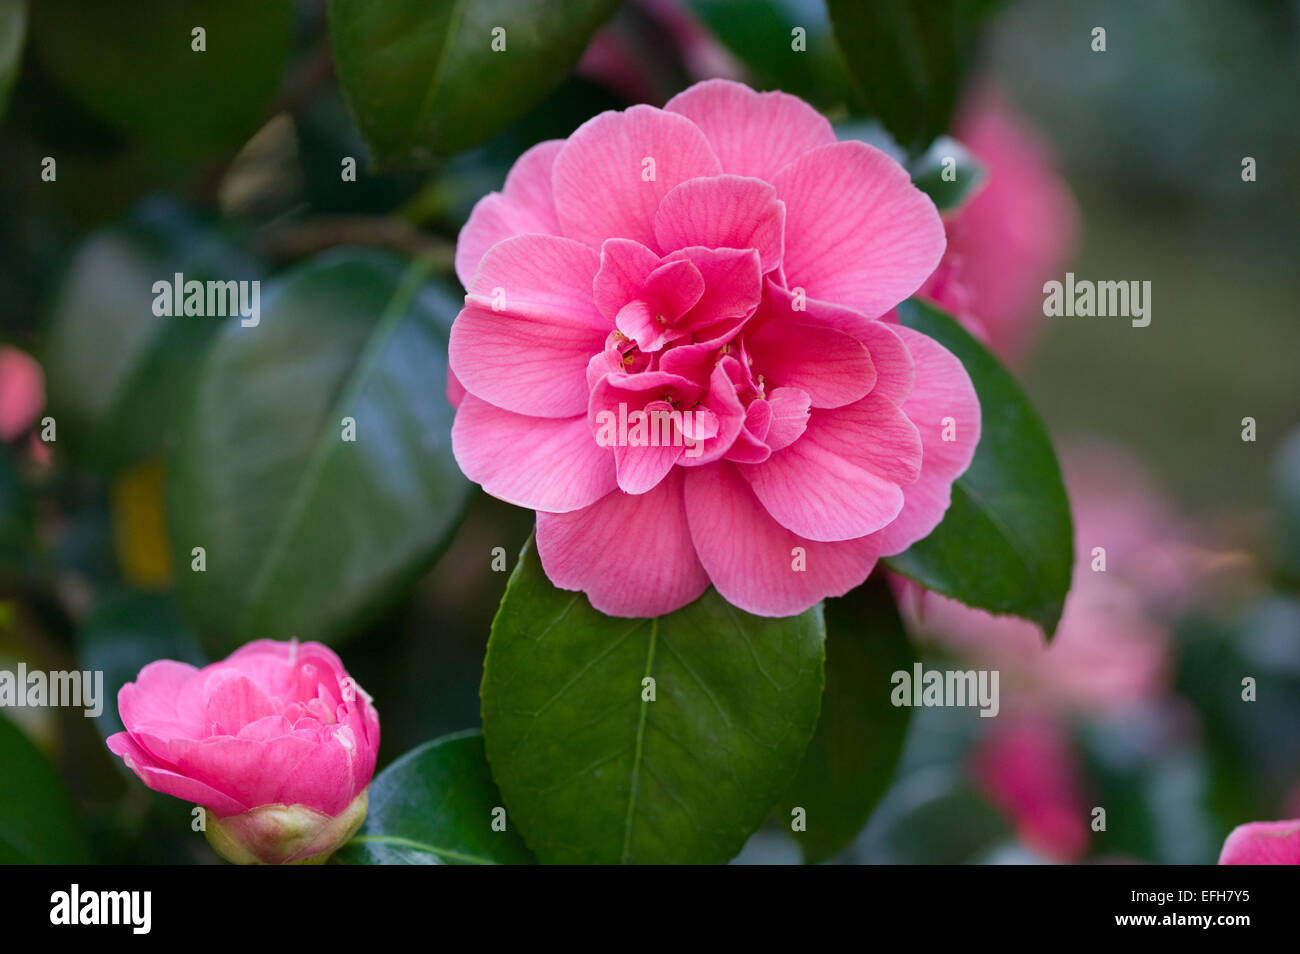 Camellia x williamsii flower in spring, Wales, UK Stock Photo